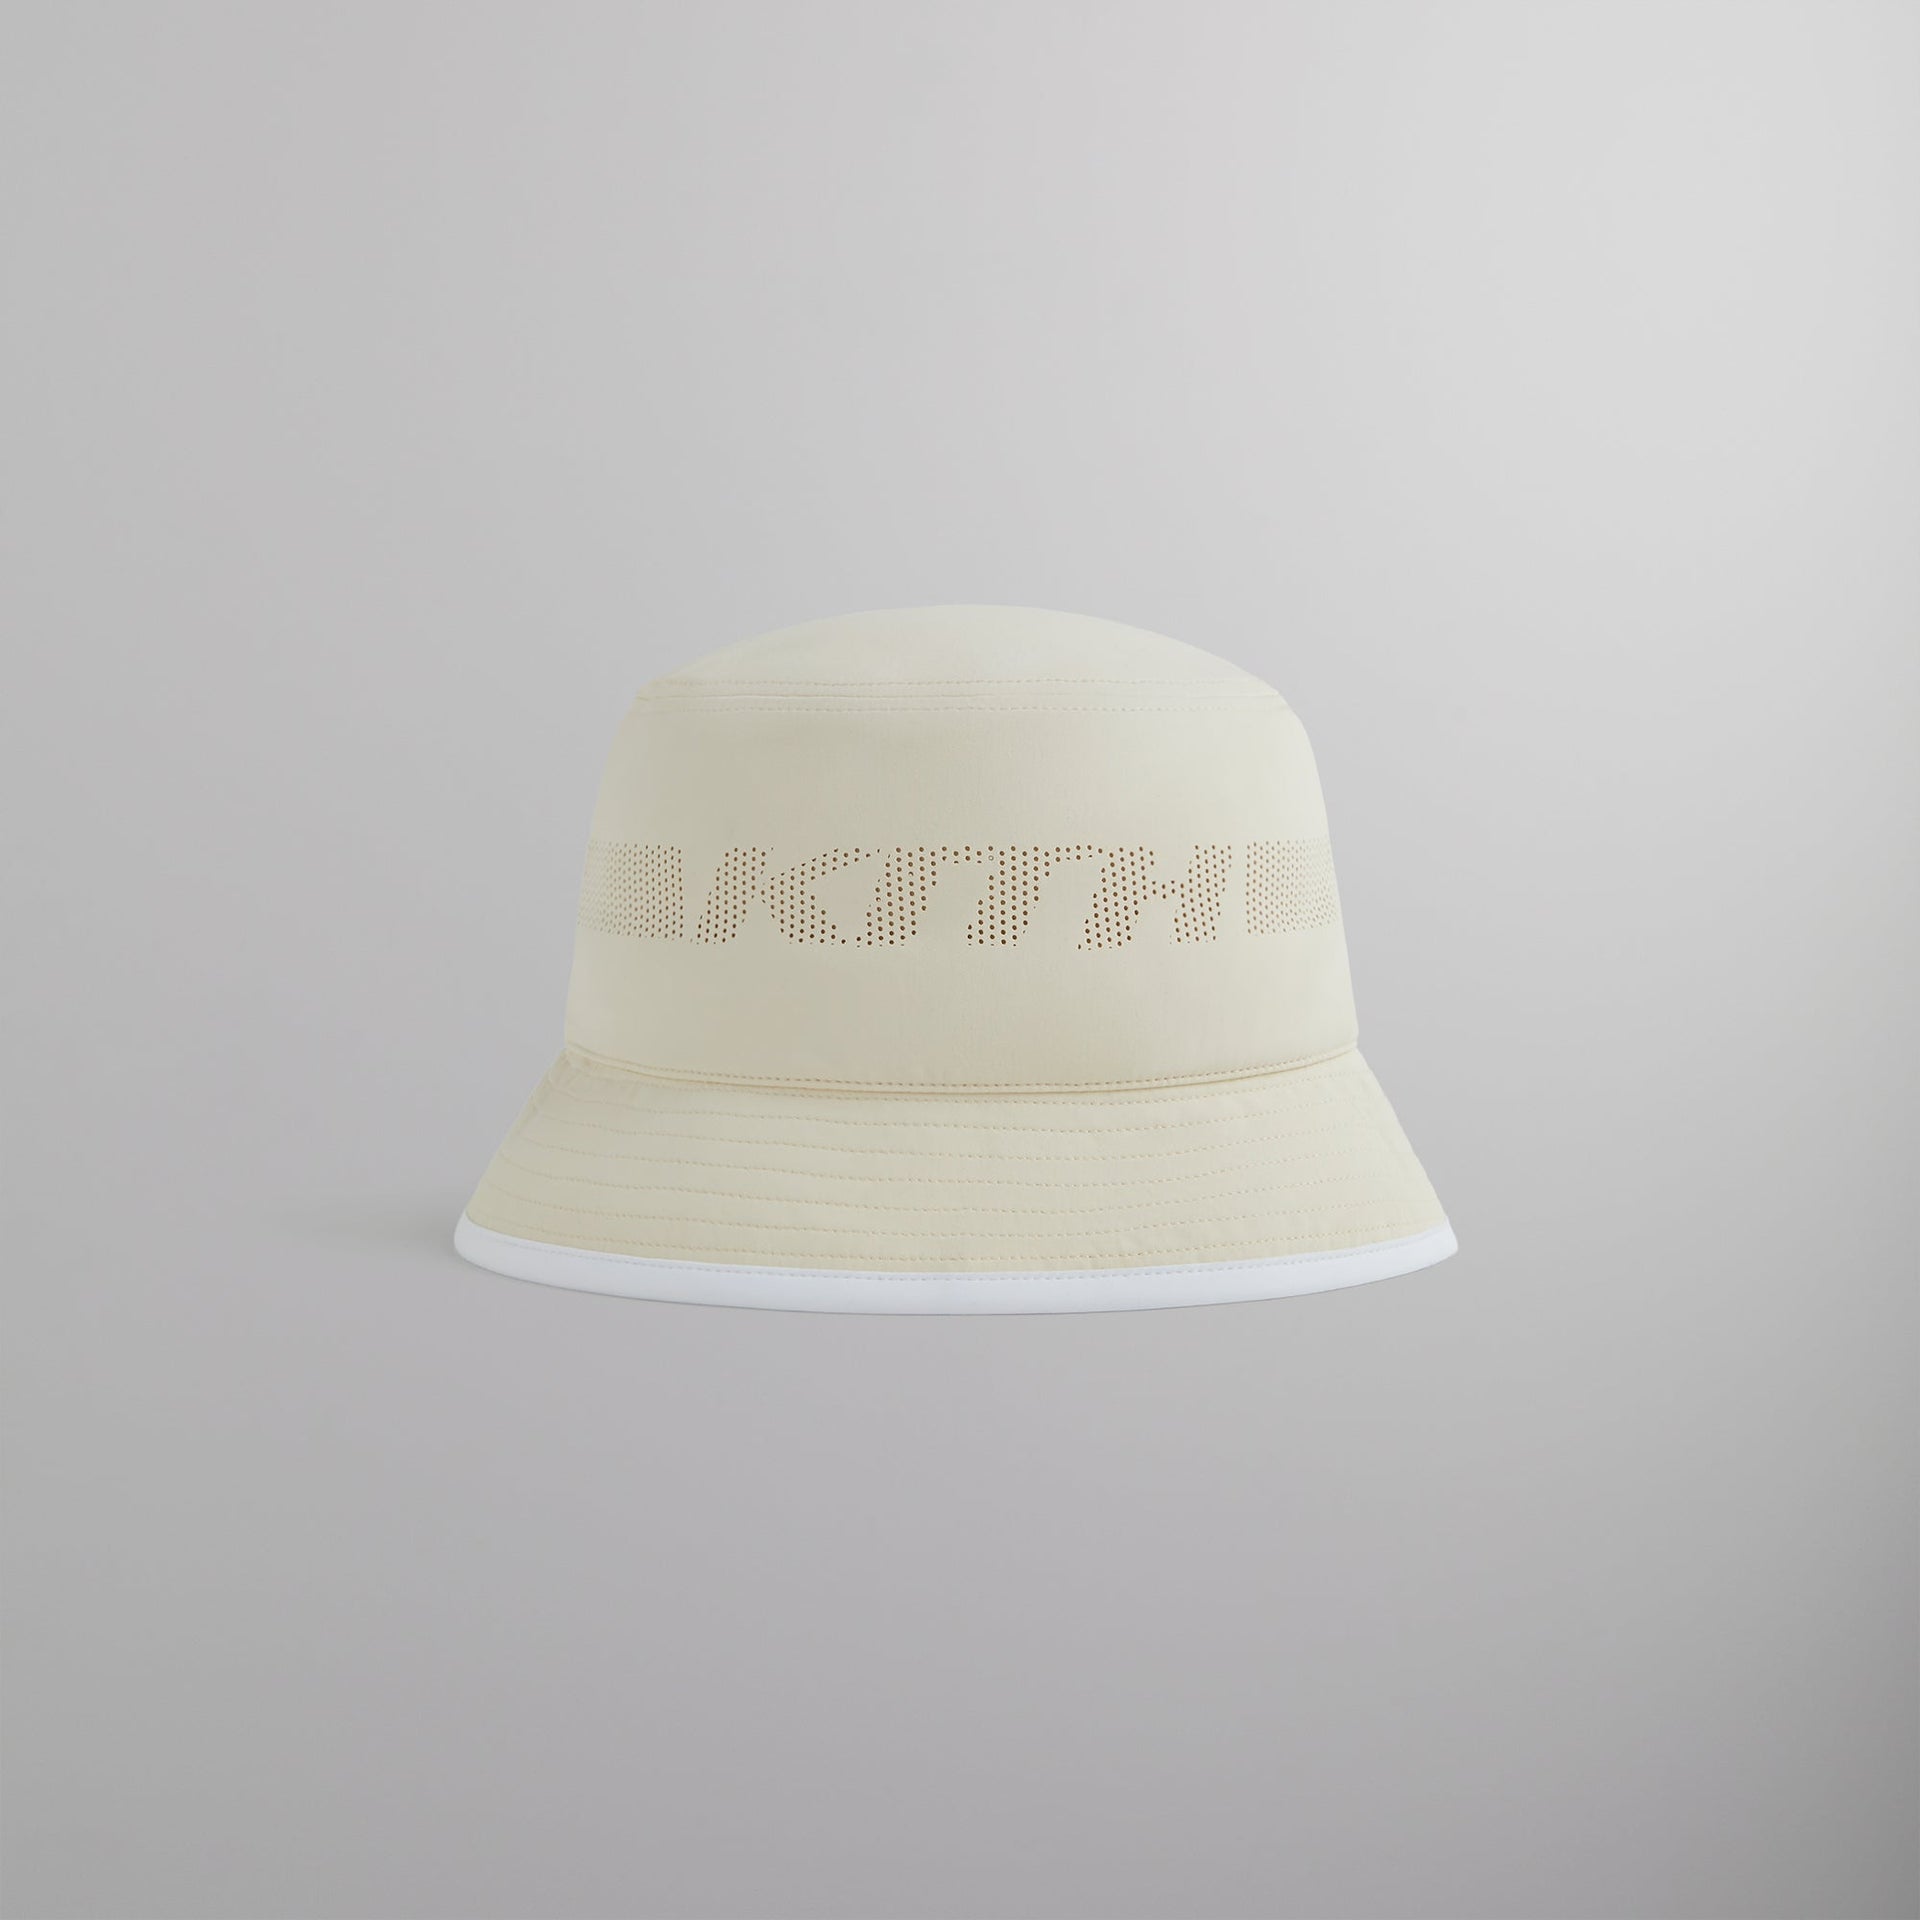 Kith for TaylorMade Perforated Bucket Hat - Rye PH